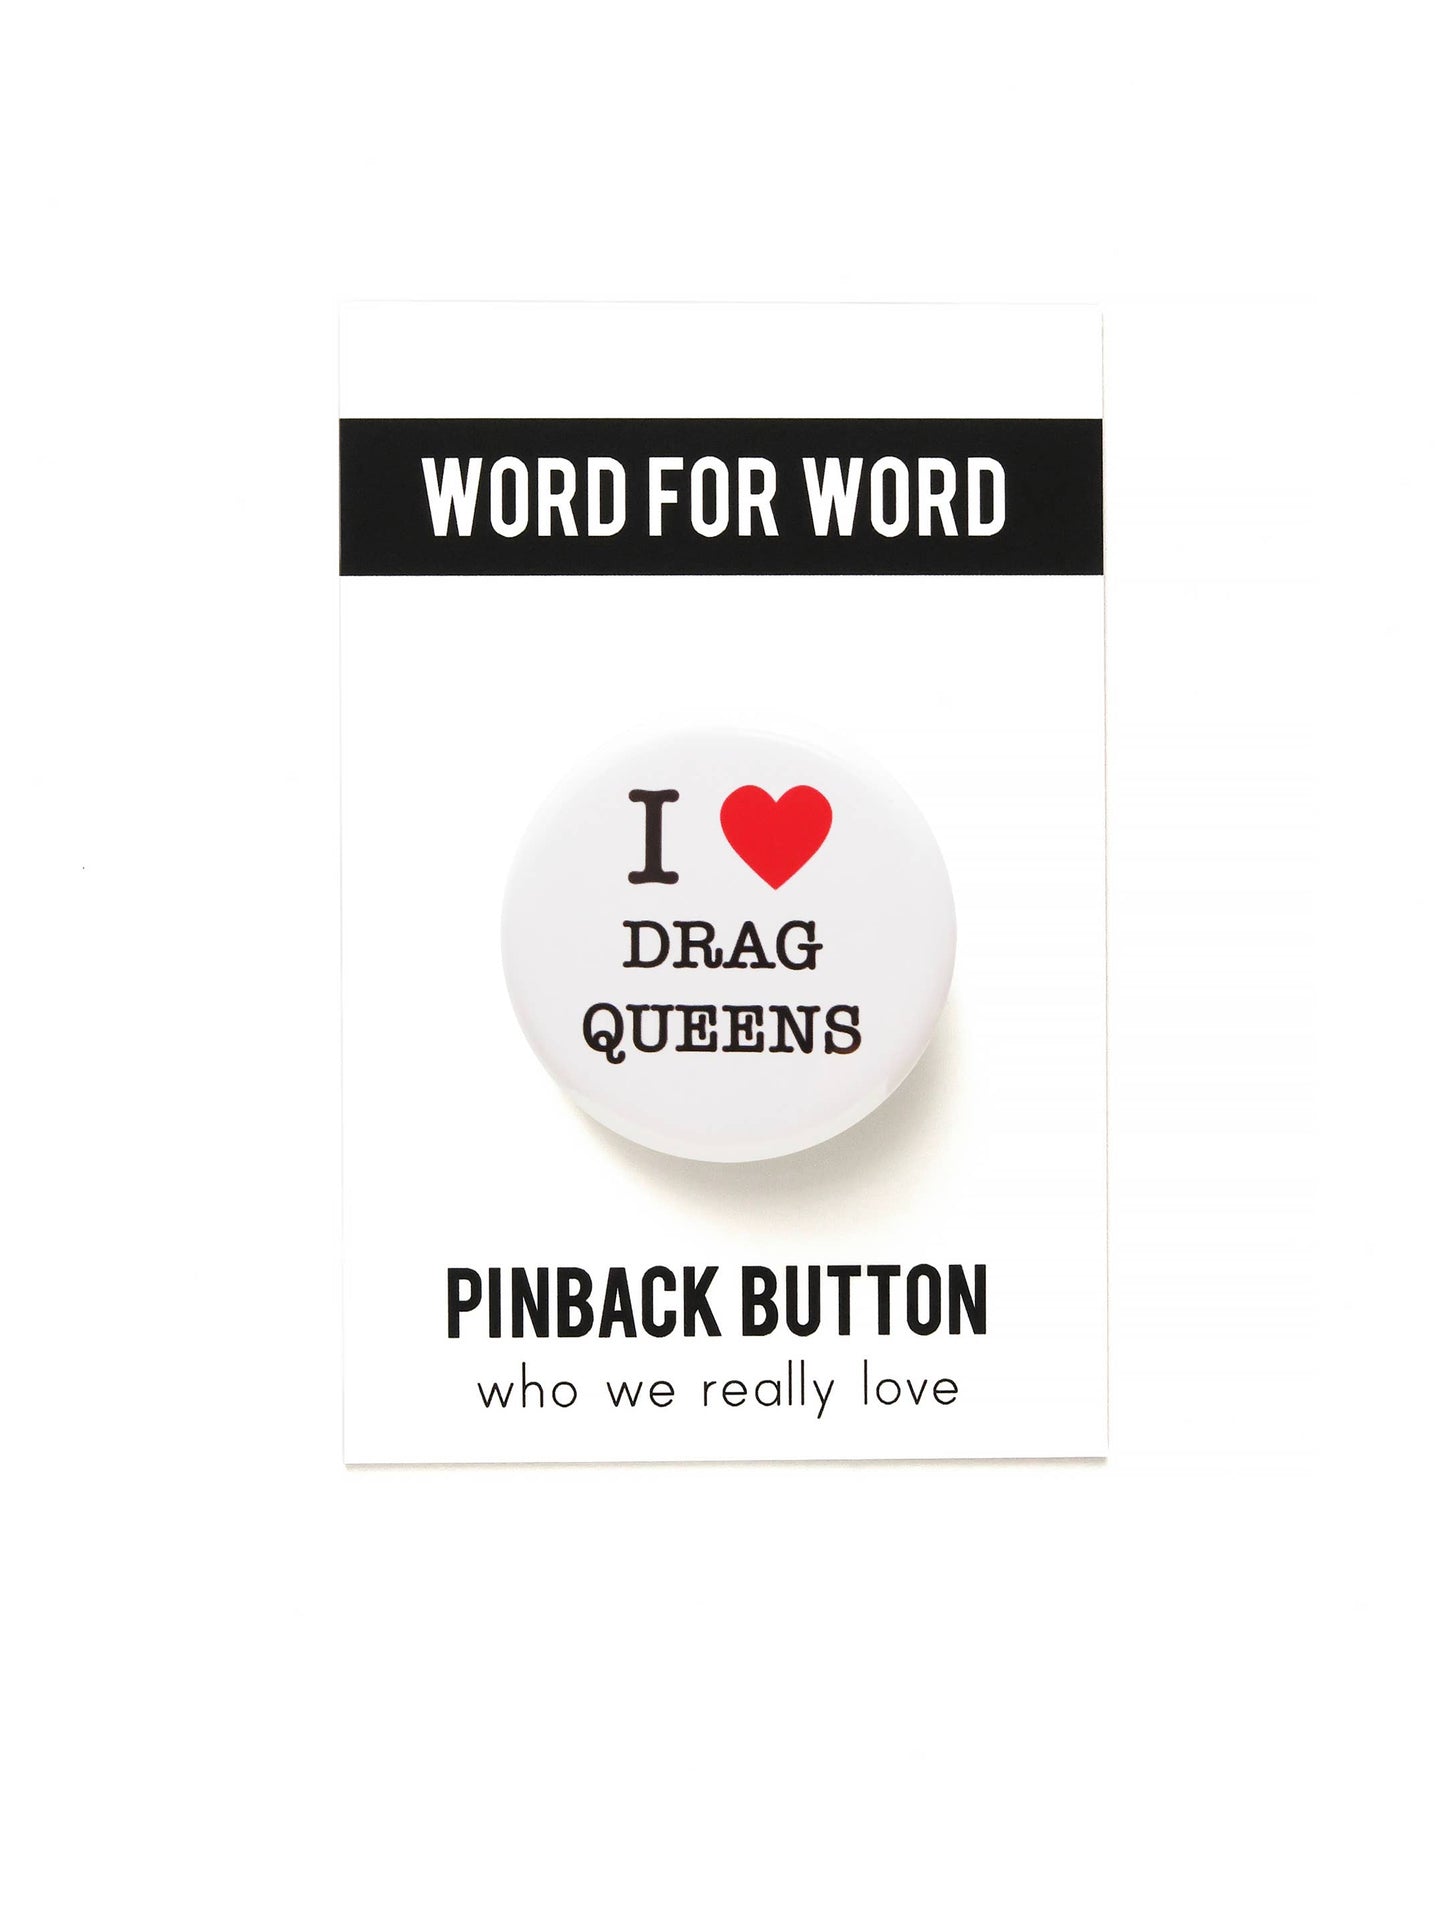 WORD FOR WORD Factory - I LOVE DRAG QUEENS pinback buttons